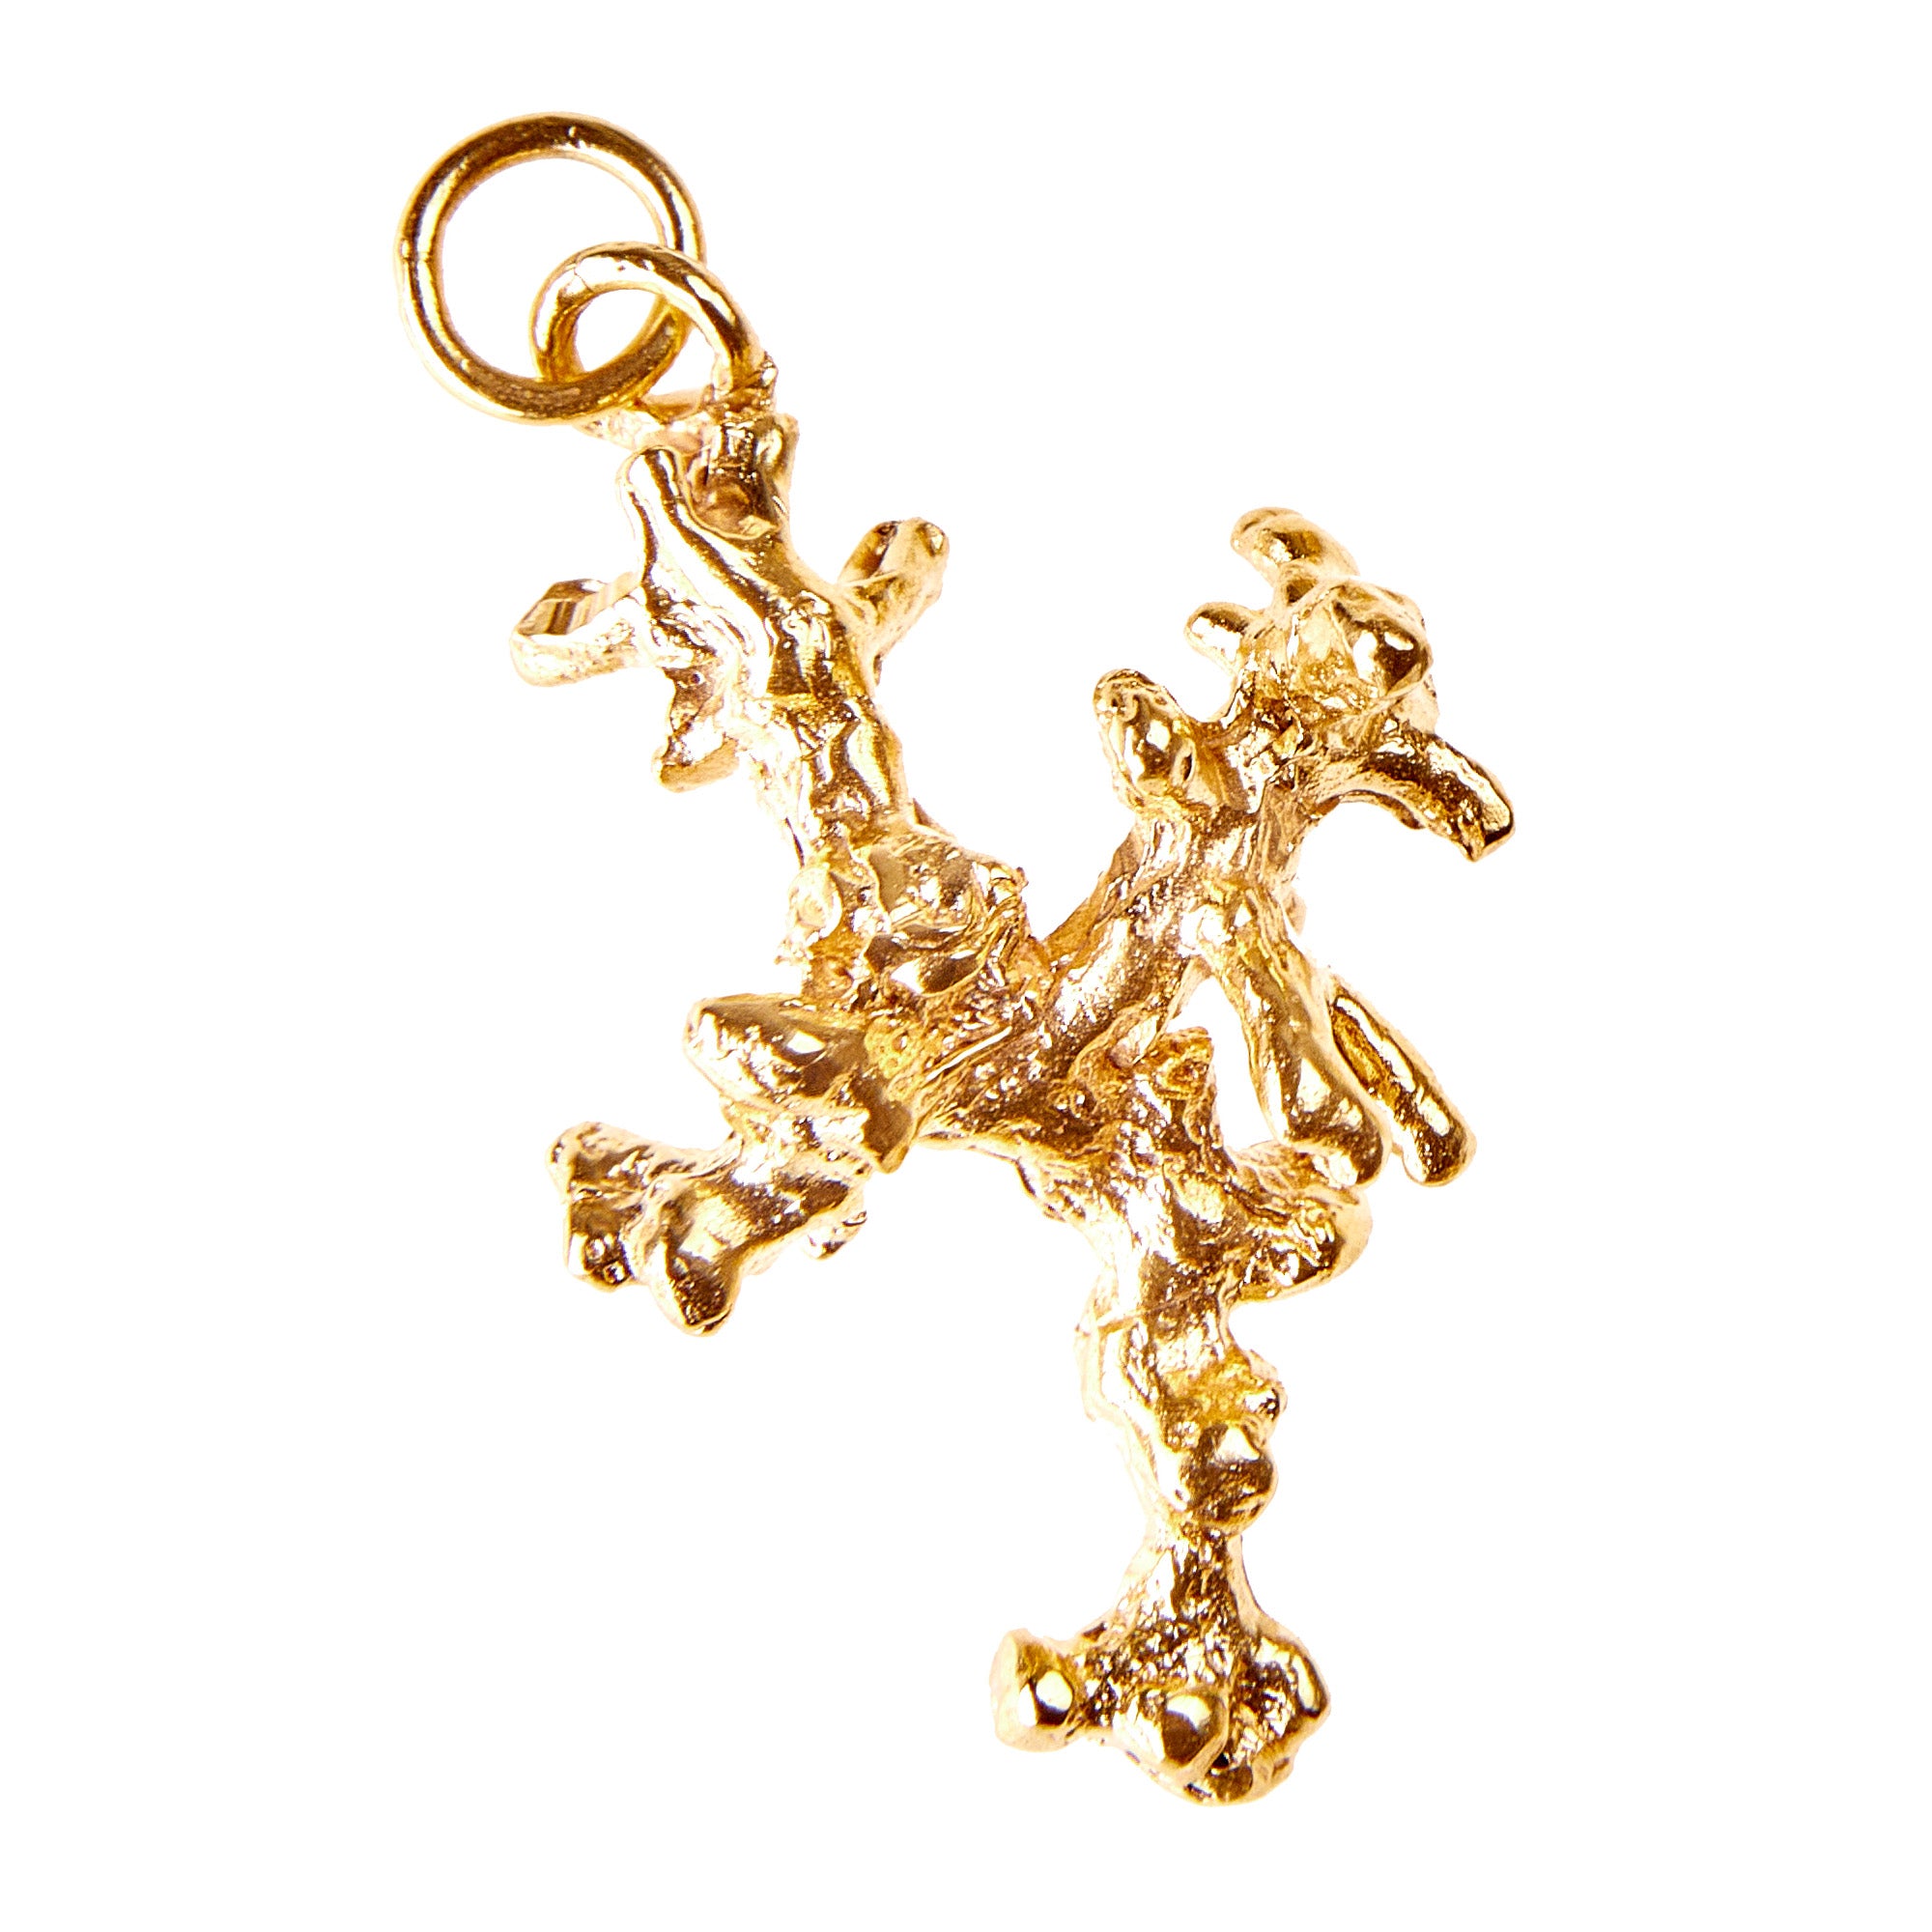 Corallia Aer Charm - Gold Plated Brass